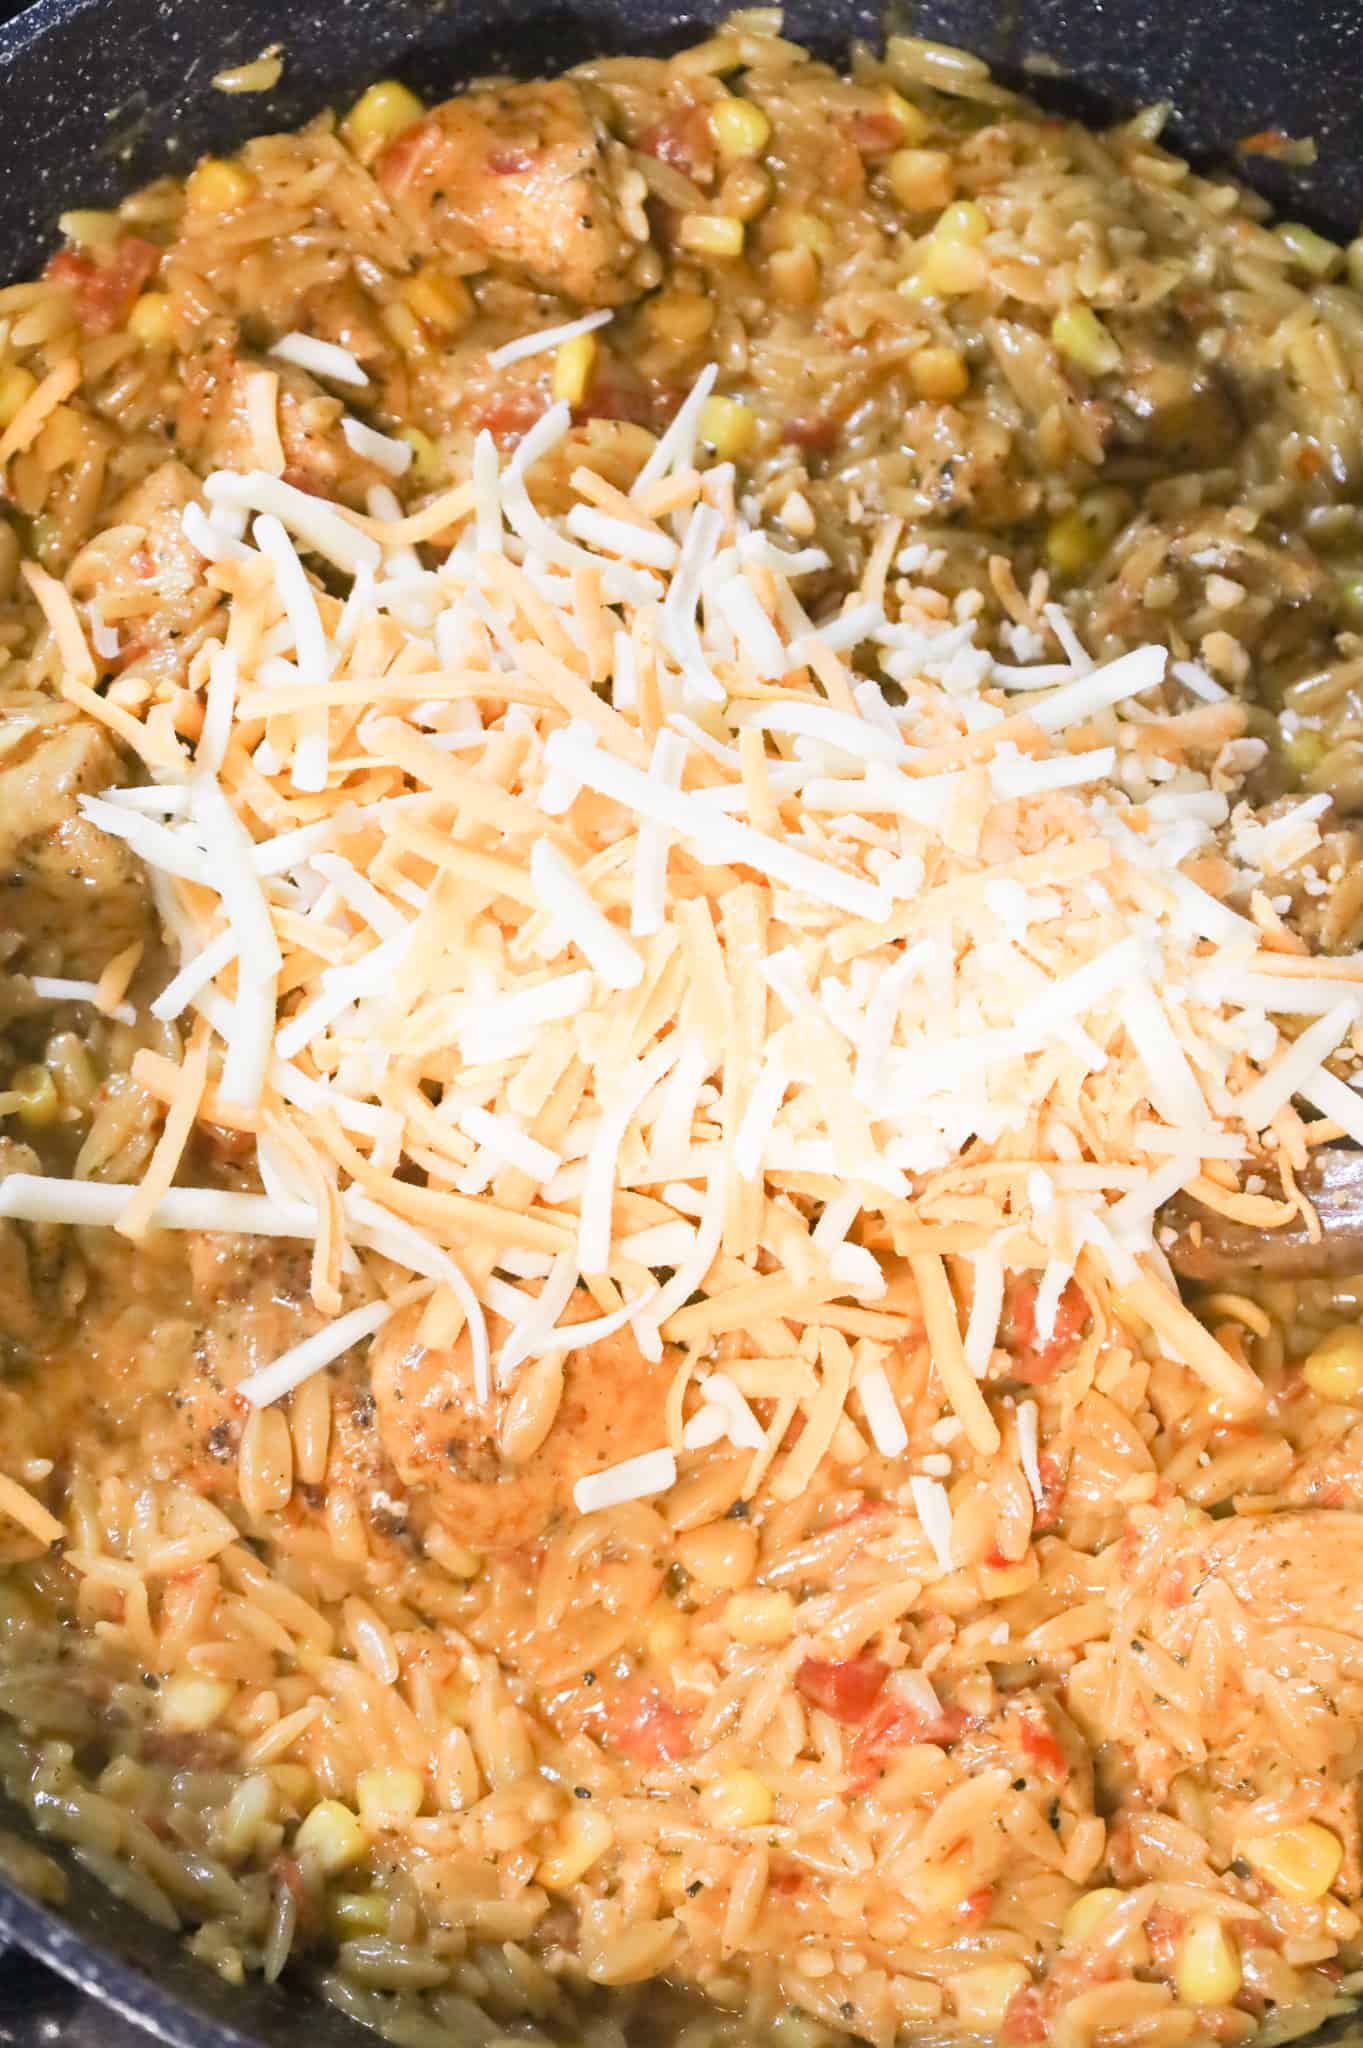 shredded cheese on top of cajun orzo pasta in a skillet